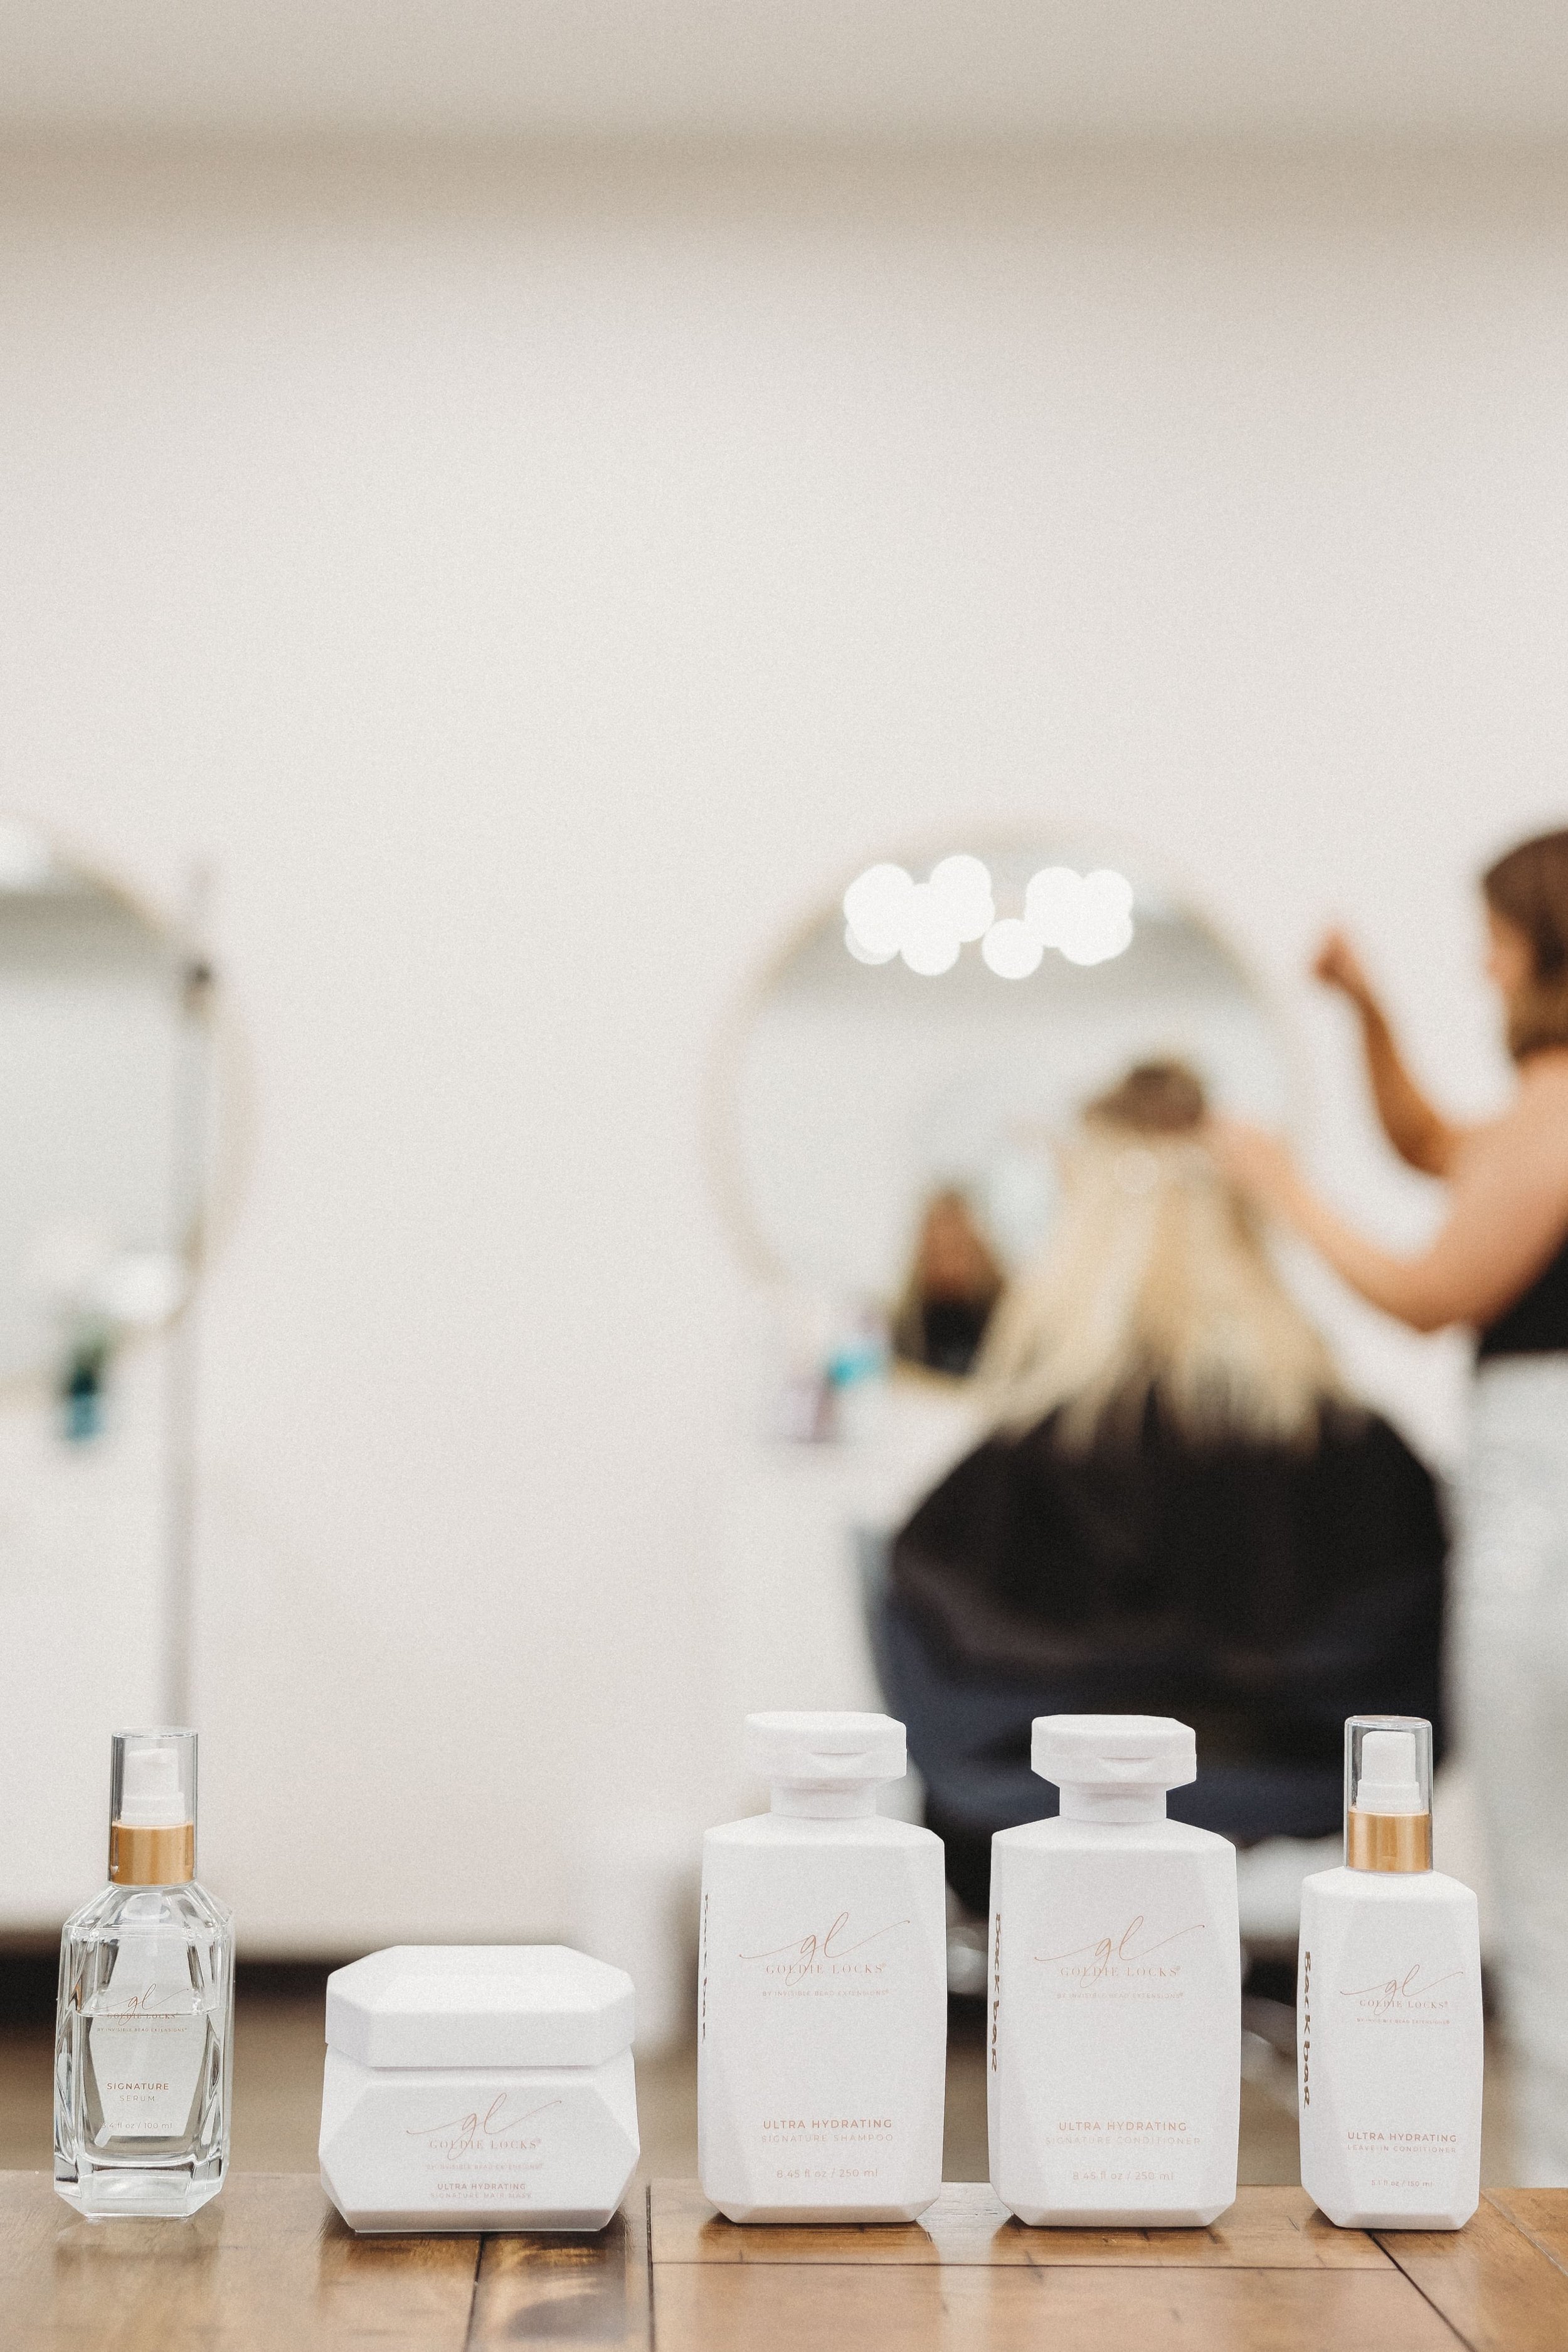  a collection of hair products stand in the foreground as a stylist puts extensions in her clients hair in the background 